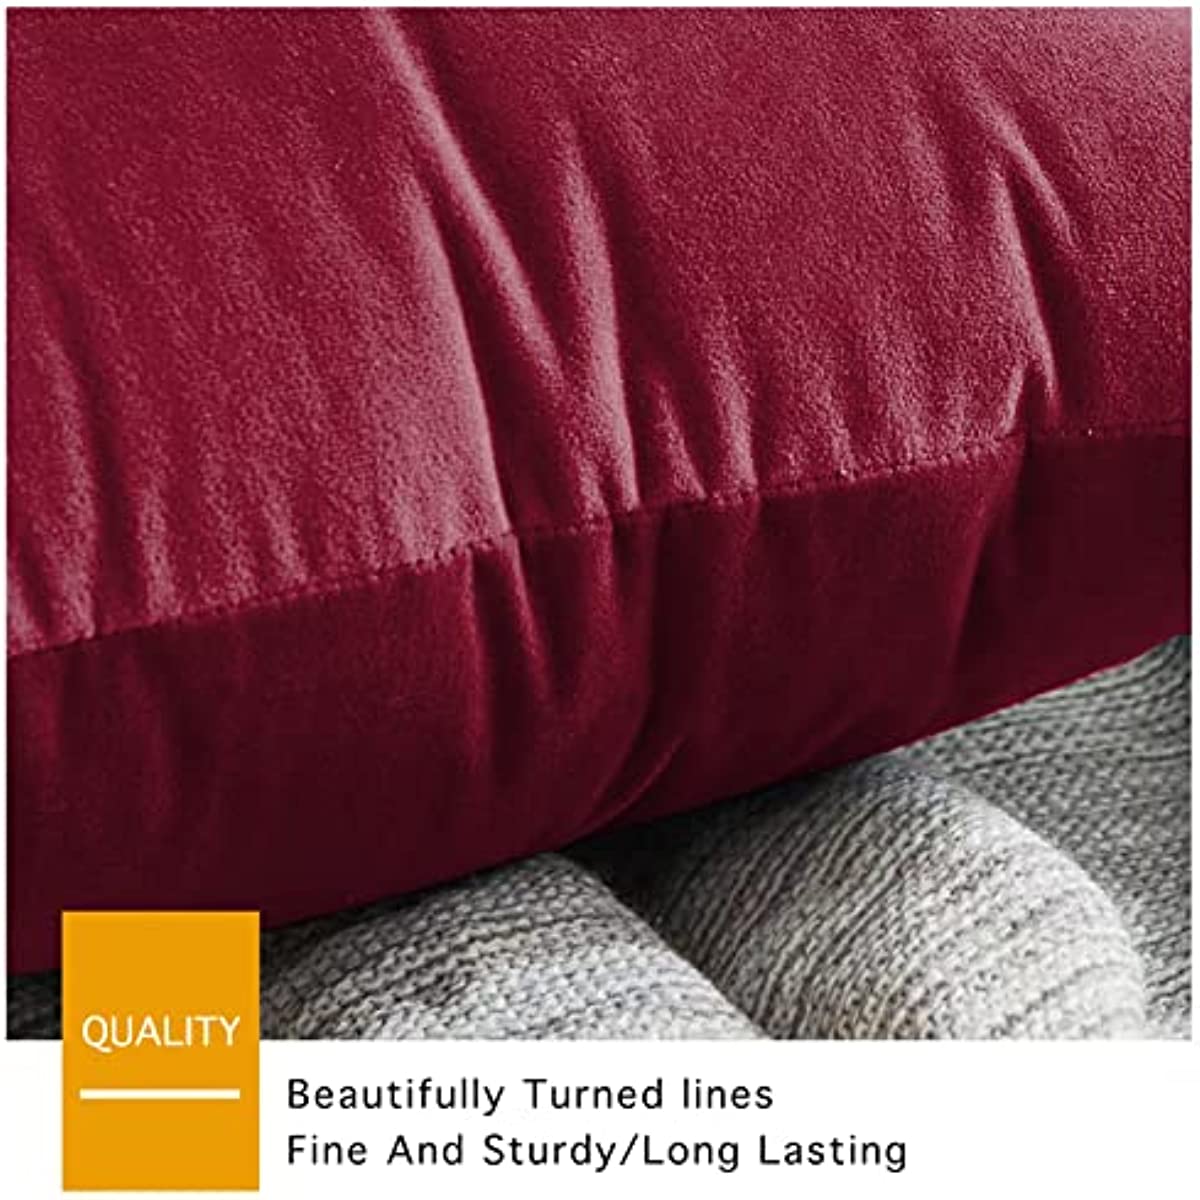 Anhome 2-Piece Set Velvet Pillow Covers, Smooth and Soft Square Pillow Covers，Designed for Decorating Sofas, Bedrooms and Cars with Pillow Covers（Multiple Size Options） RED